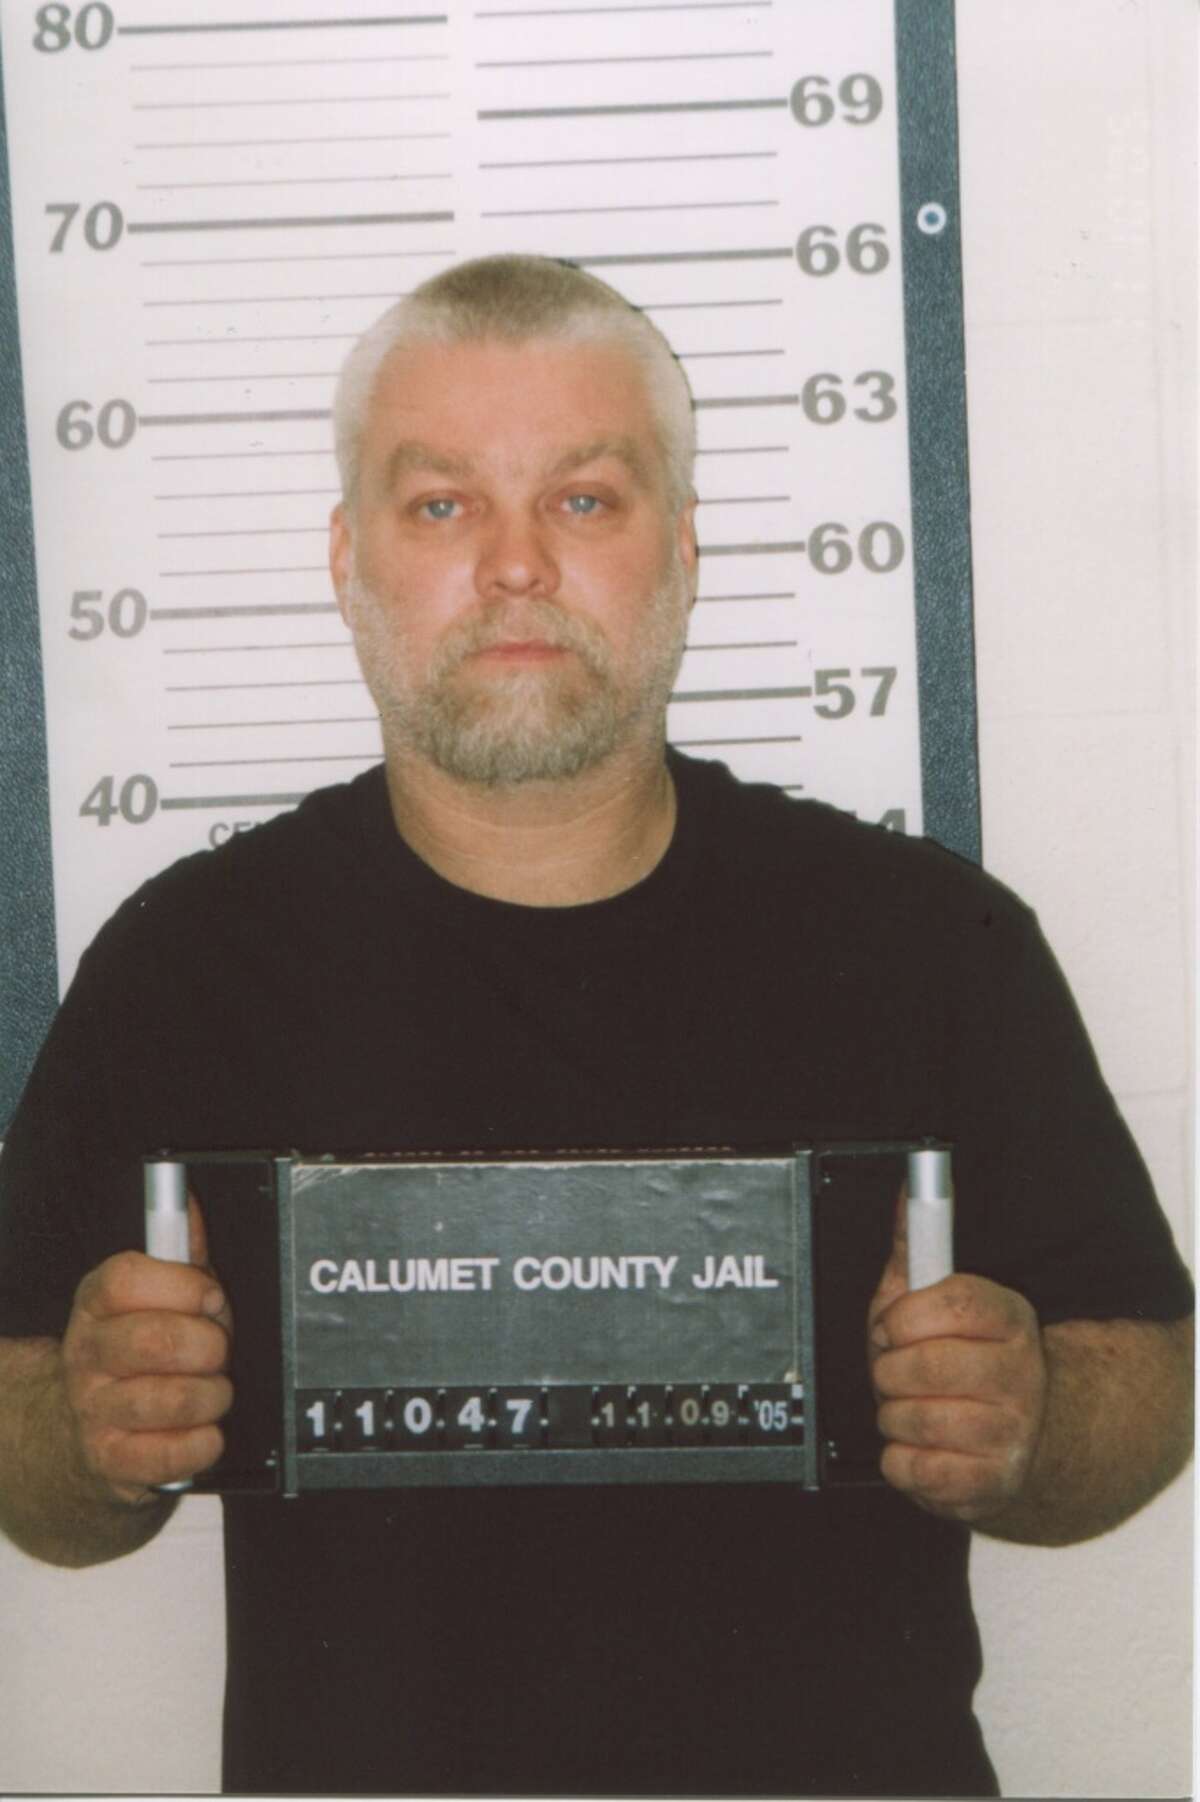 Making a Murderer (Netflix): After spending 18 years in prison for a violent crime he didn't commit, Steven Avery was released only to be charged with a murder two years later. But was he set up? The 10-hour documentary is filled with twists and turns, and you won't be able to stop watching.